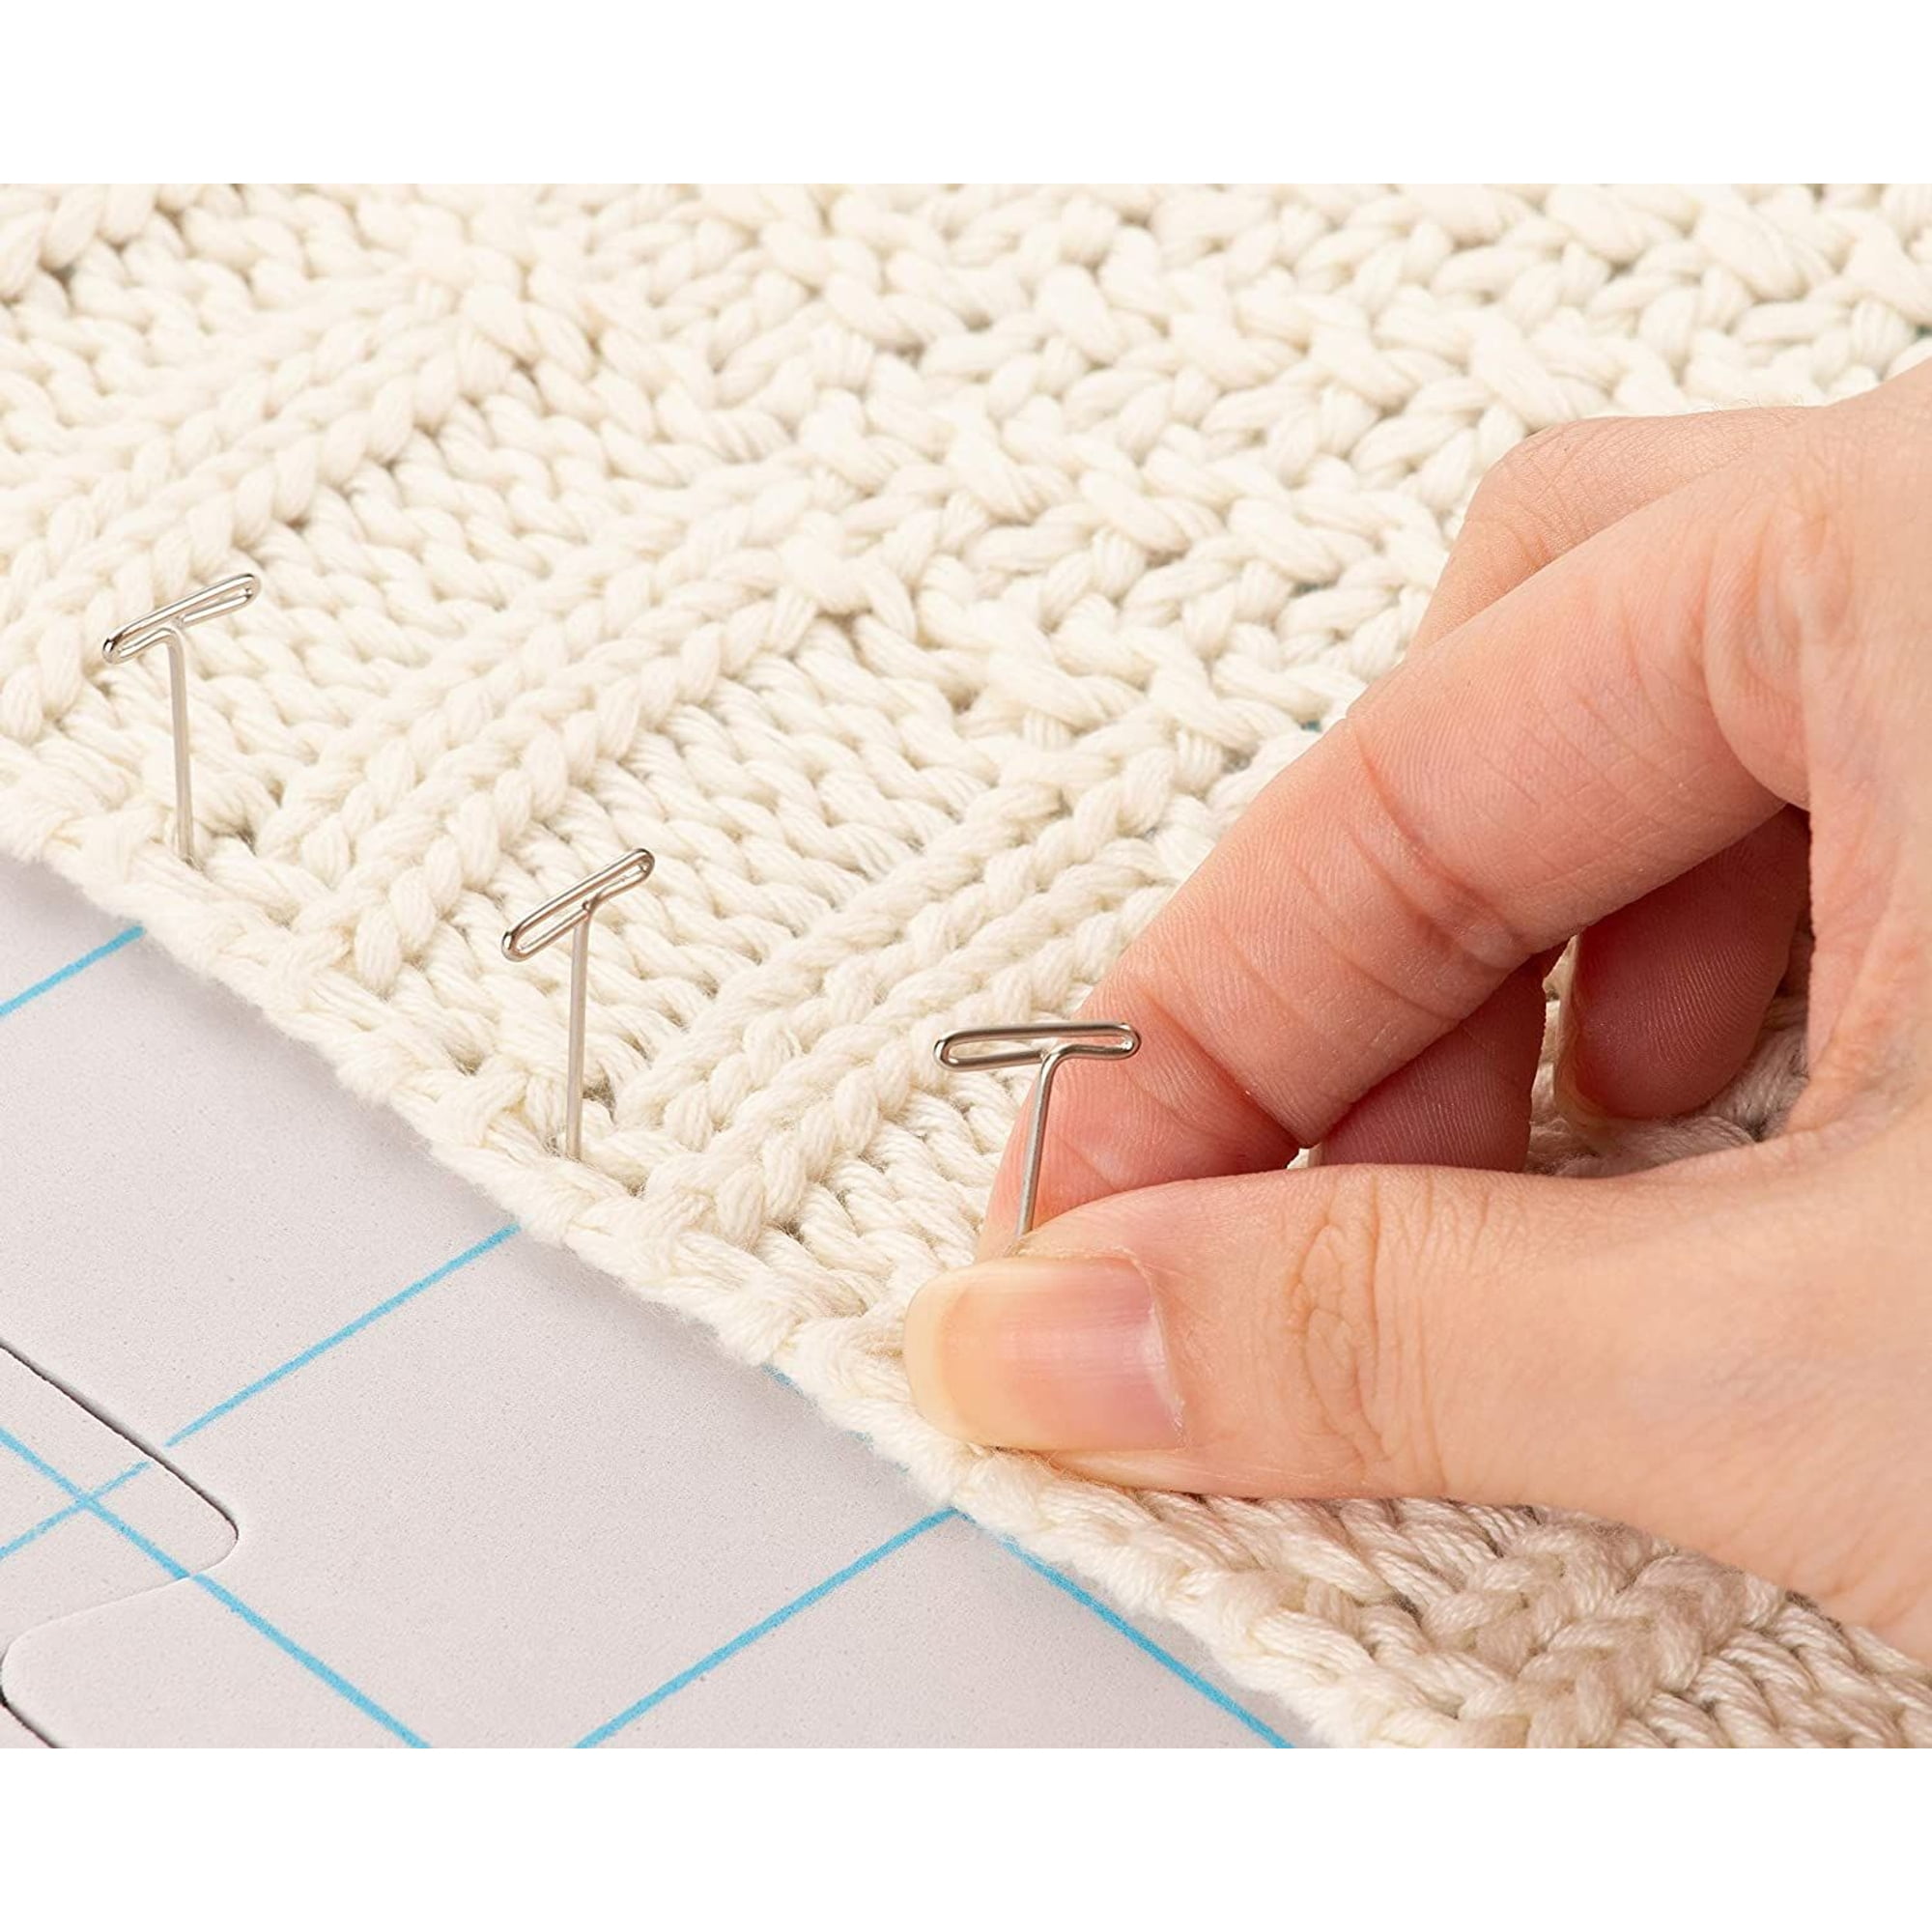  Knit Picks Premium Blocking Mats for Knitting and Crochet, Pack  of 9 Extra Thick Blocking Boards with Grids, Includes 100 T-Pins and  Storage Bag : Arts, Crafts & Sewing